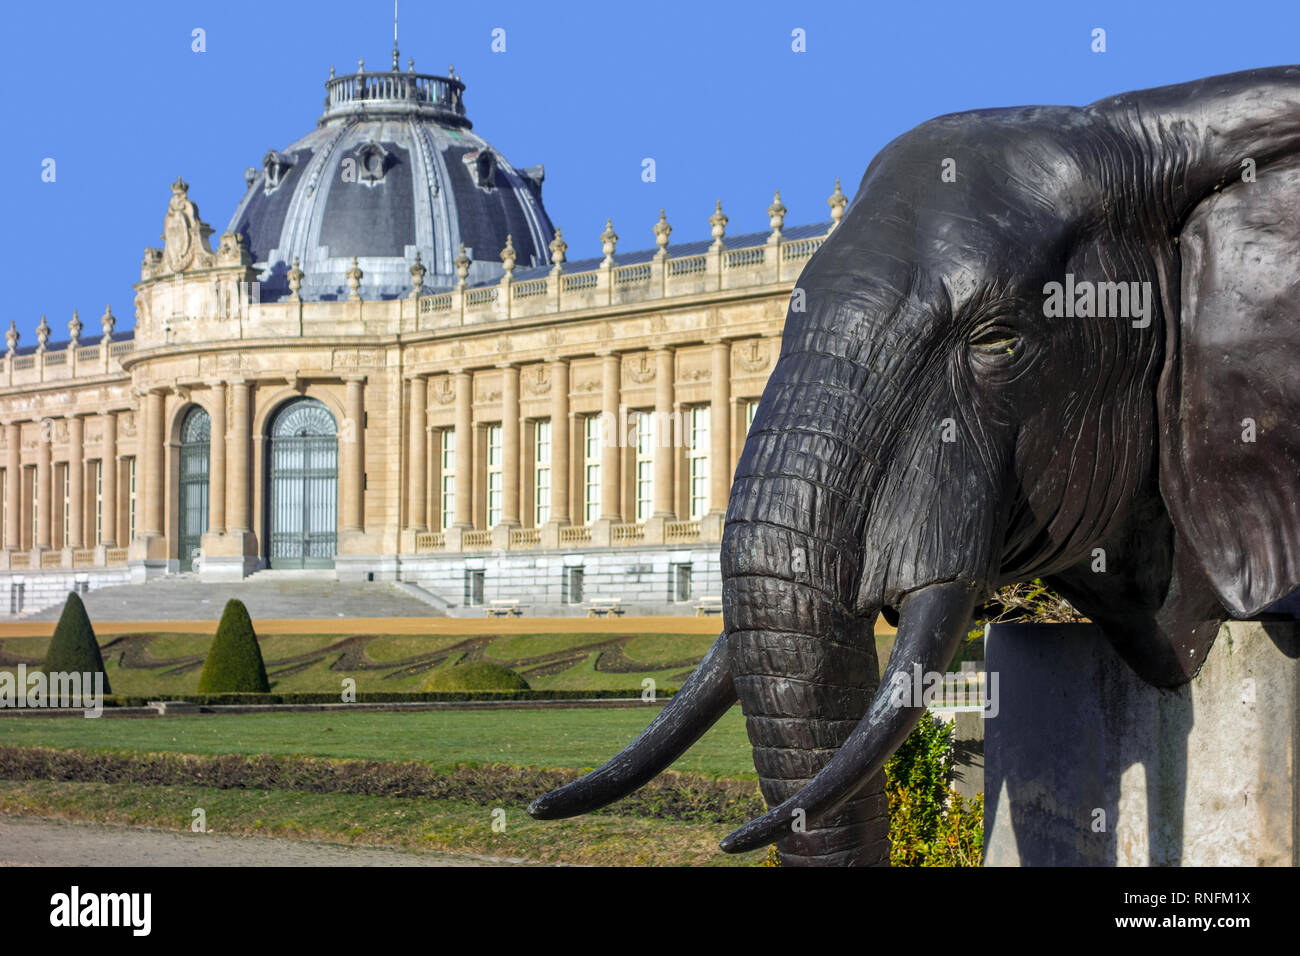 AfricaMuseum / Royal Museum for Central Africa, ethnography and natural history museum at Tervuren, Flemish Brabant, Belgium Stock Photo